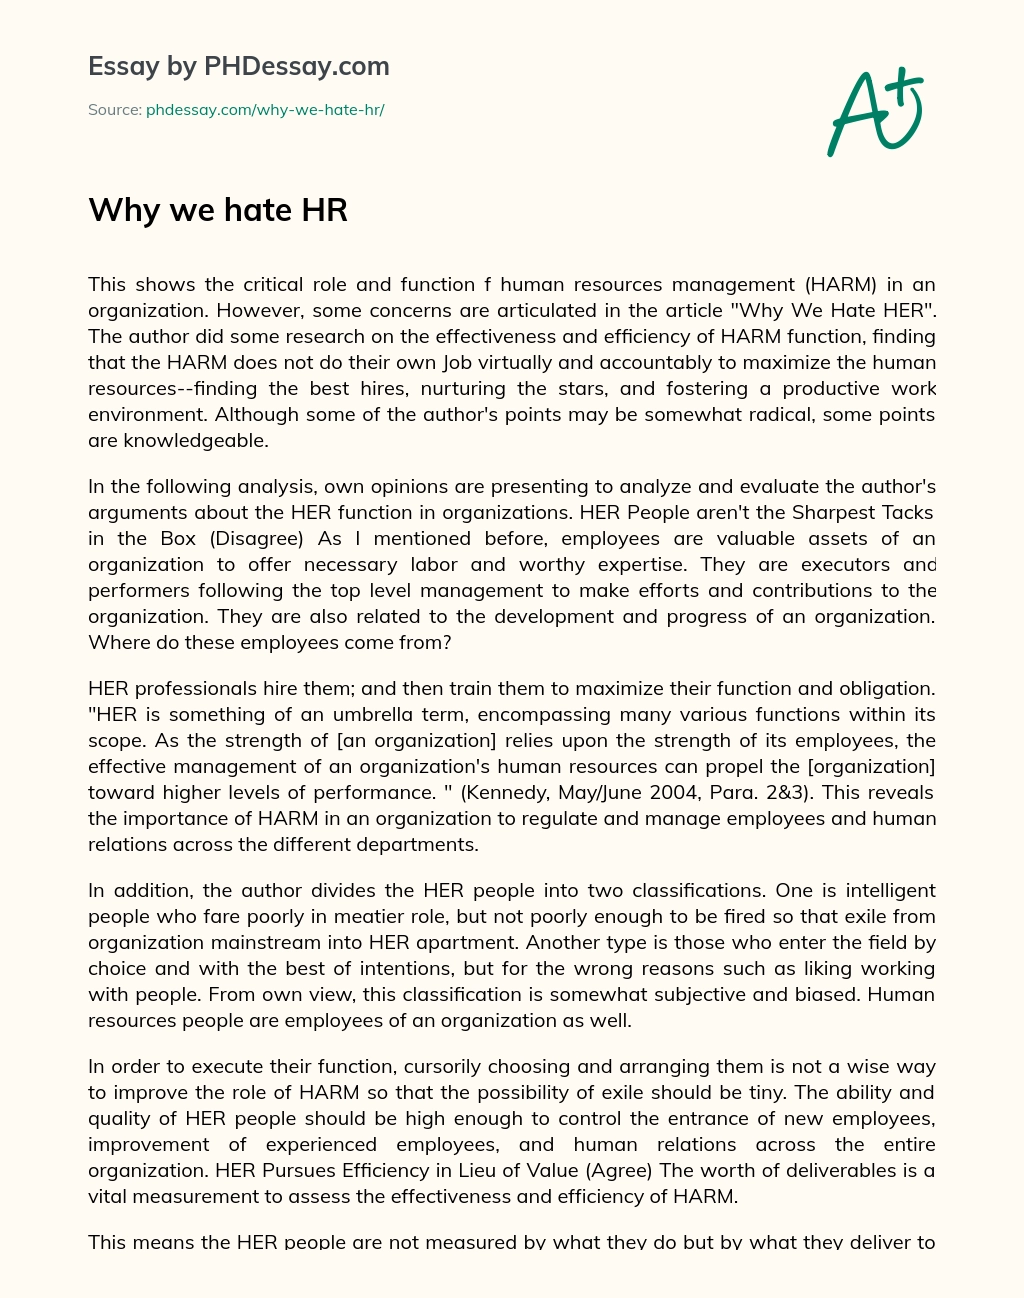 Why we hate HR essay